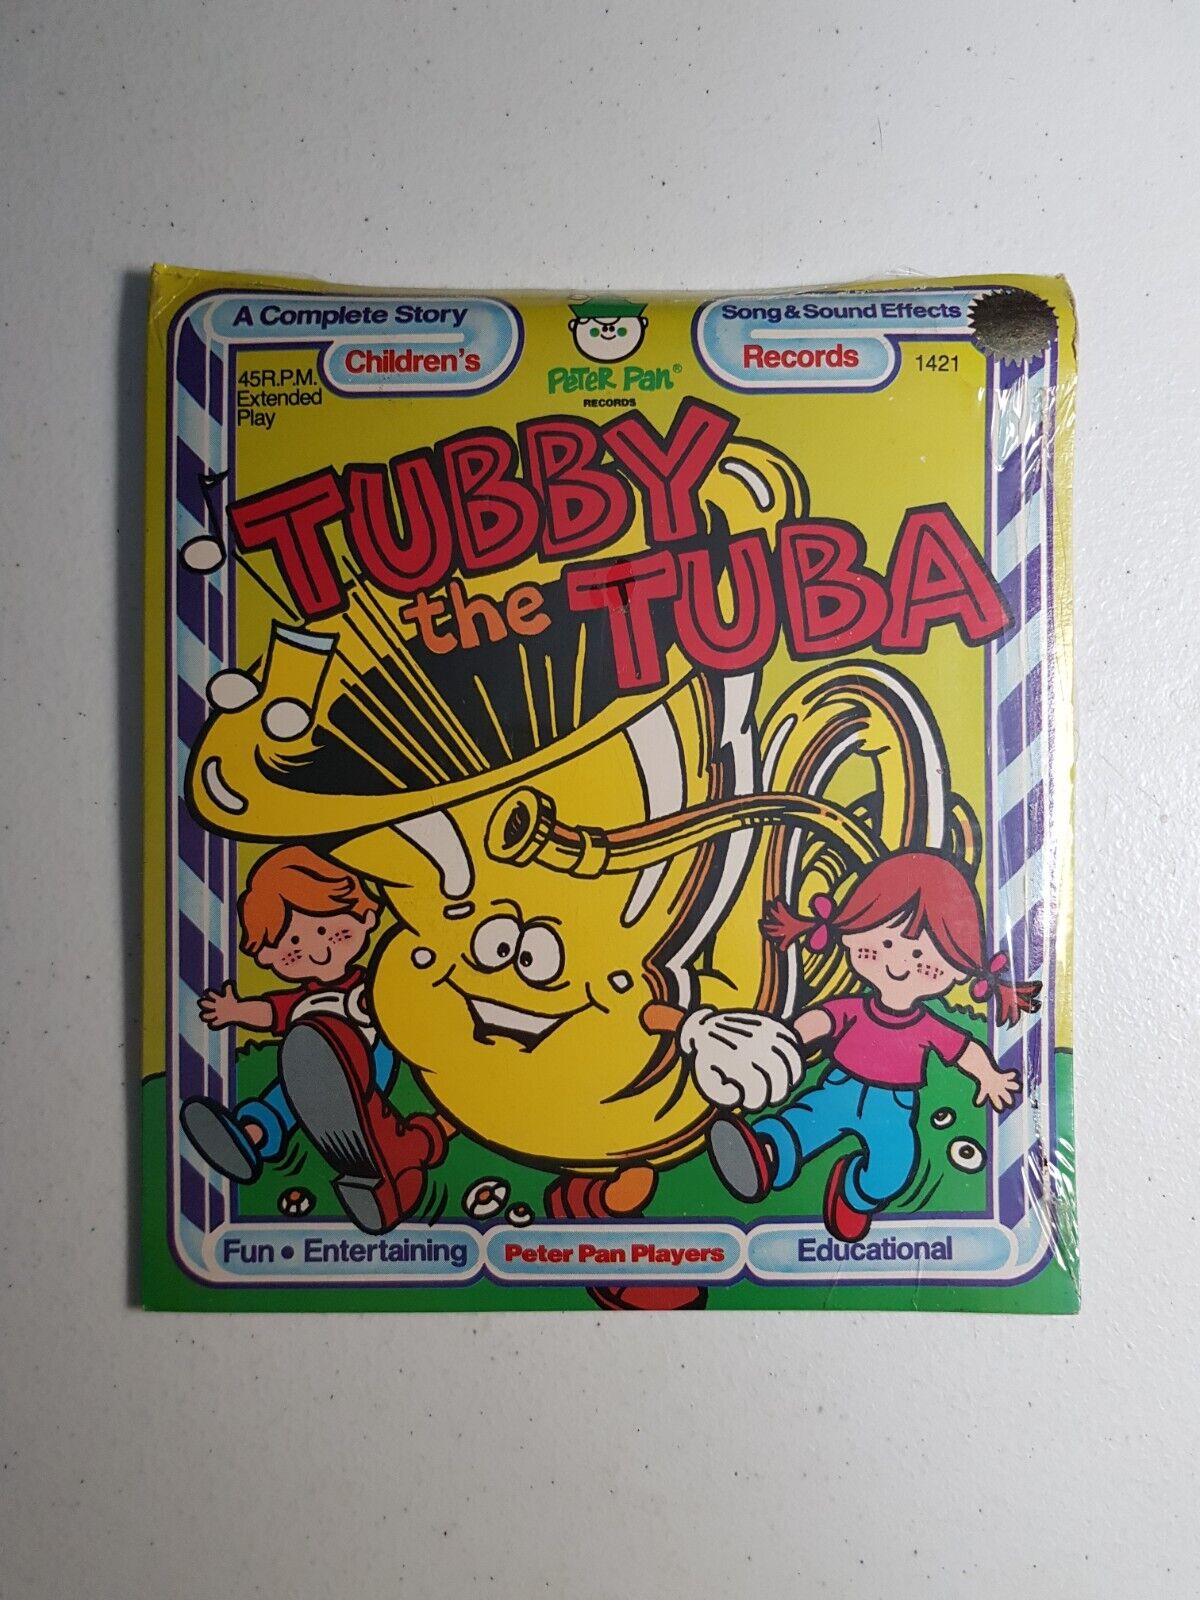 Peter Pan Record - #1421 Tubby The Tuba Complete Story Records 45 RPM